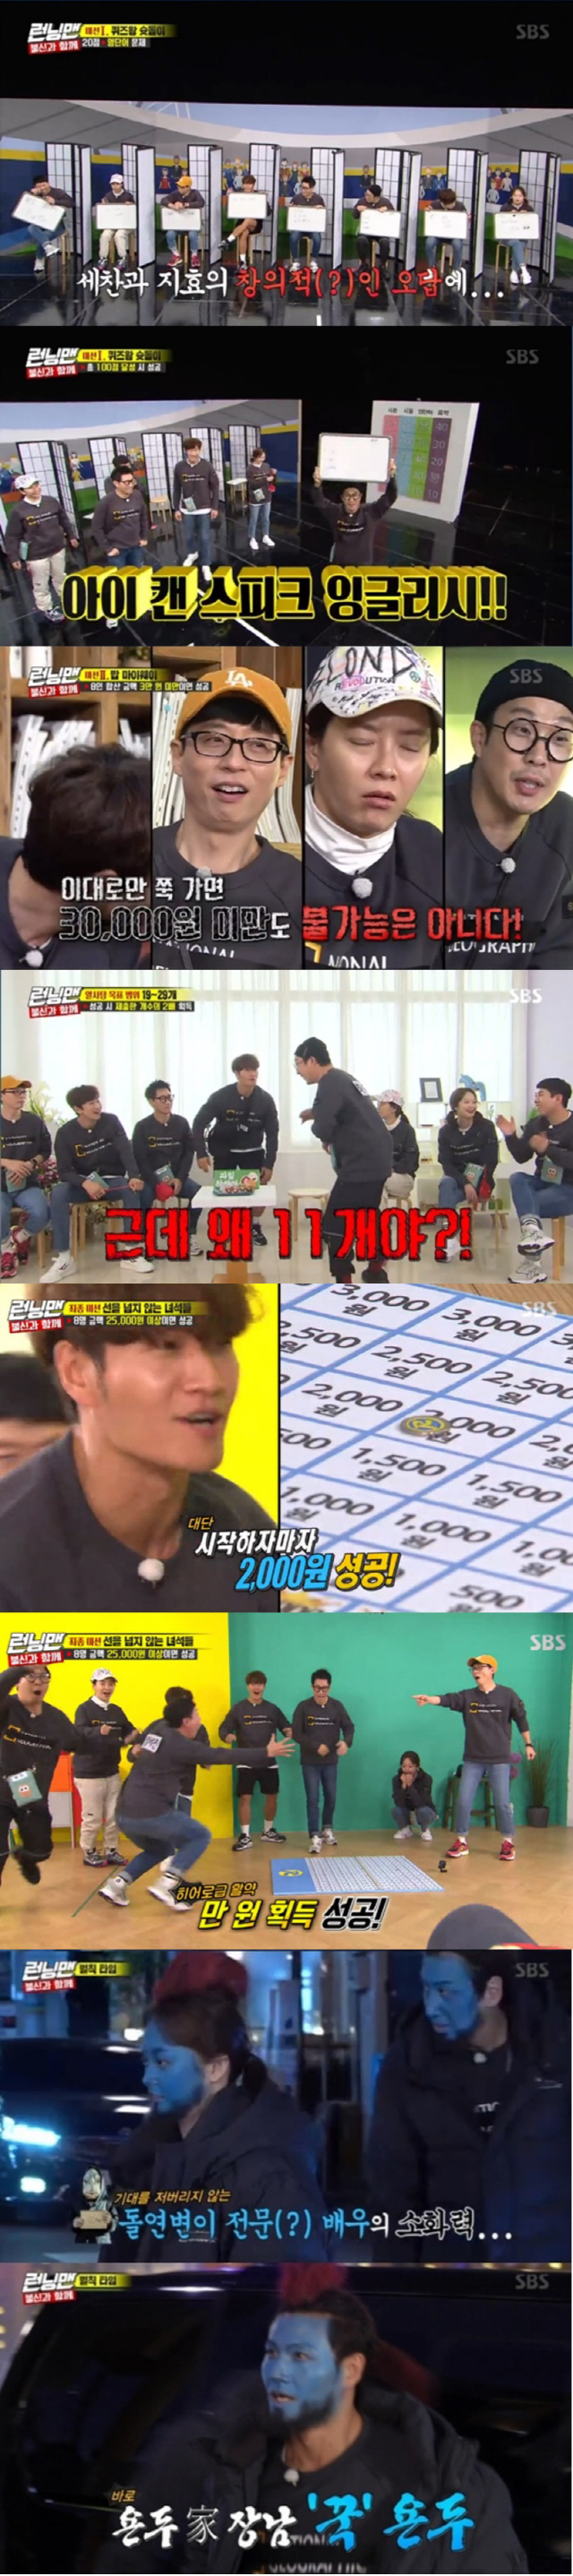 SBS Running Man kept the top spot in the same time zone of 2049 target TV viewer ratings.According to Nielsen Korea, a TV viewer rating research institute, Running Man, which was broadcast on the 1st of last month, was ranked # 1 in the same time zone entertainment with 4.1% of 2049 target TV viewer ratings (based on the second part of the metropolitan area furniture TV viewer ratings) and Masked Wang and The average TV viewer ratings were 5.5% in the first part and 7.6% in the second part, while the highest TV viewer ratings per minute soared to 8.4%.The broadcast was featured in a special united race With Disbelief for members who had doubts and fraternities in the past few weeks.In the first mission, The King of Quiz he had to unanimously answer the correct answer: all kinds of fouls and Jeon So-mins wrong answers came out, but all the correct answers came out.In the second mission Bob My Way, the performance of Jeon So-min was prominent.One of the eight different menus with different prices was private, and if the sum was less than 30,000 won, it was a power pass.With Ji Suk-jin opting for a high-priced soy sauce, Jeon So-min chose a boiled egg and all the members ate well.On the other hand, the third mission Category Answer that succeeded when all the people said the category presented in 8 seconds failed, and once again the distrust of the members raised their heads and laughed.Fortunately, in the final mission The Guys who do not cross the line, Yang Se-chan won the 10,000 won in his performance and got a good feeling.Yang Se-chan won the penalty exemption by ranking first by member, and the penalty was confirmed when Jeon So-min and Lee Kwang-soo were ranked 7th and 8th.Penalists Jeon So-min and Lee Kwang-soo had to sell Bungeo-pang on the street with Running Man-pyo Megahit makeup Yondu makeup, and pointed out Kim Jong-kook as additional penalties.The three humiliation sales sites climbed to 8.4% of the highest TV viewer ratings per minute, accounting for the best one minute.